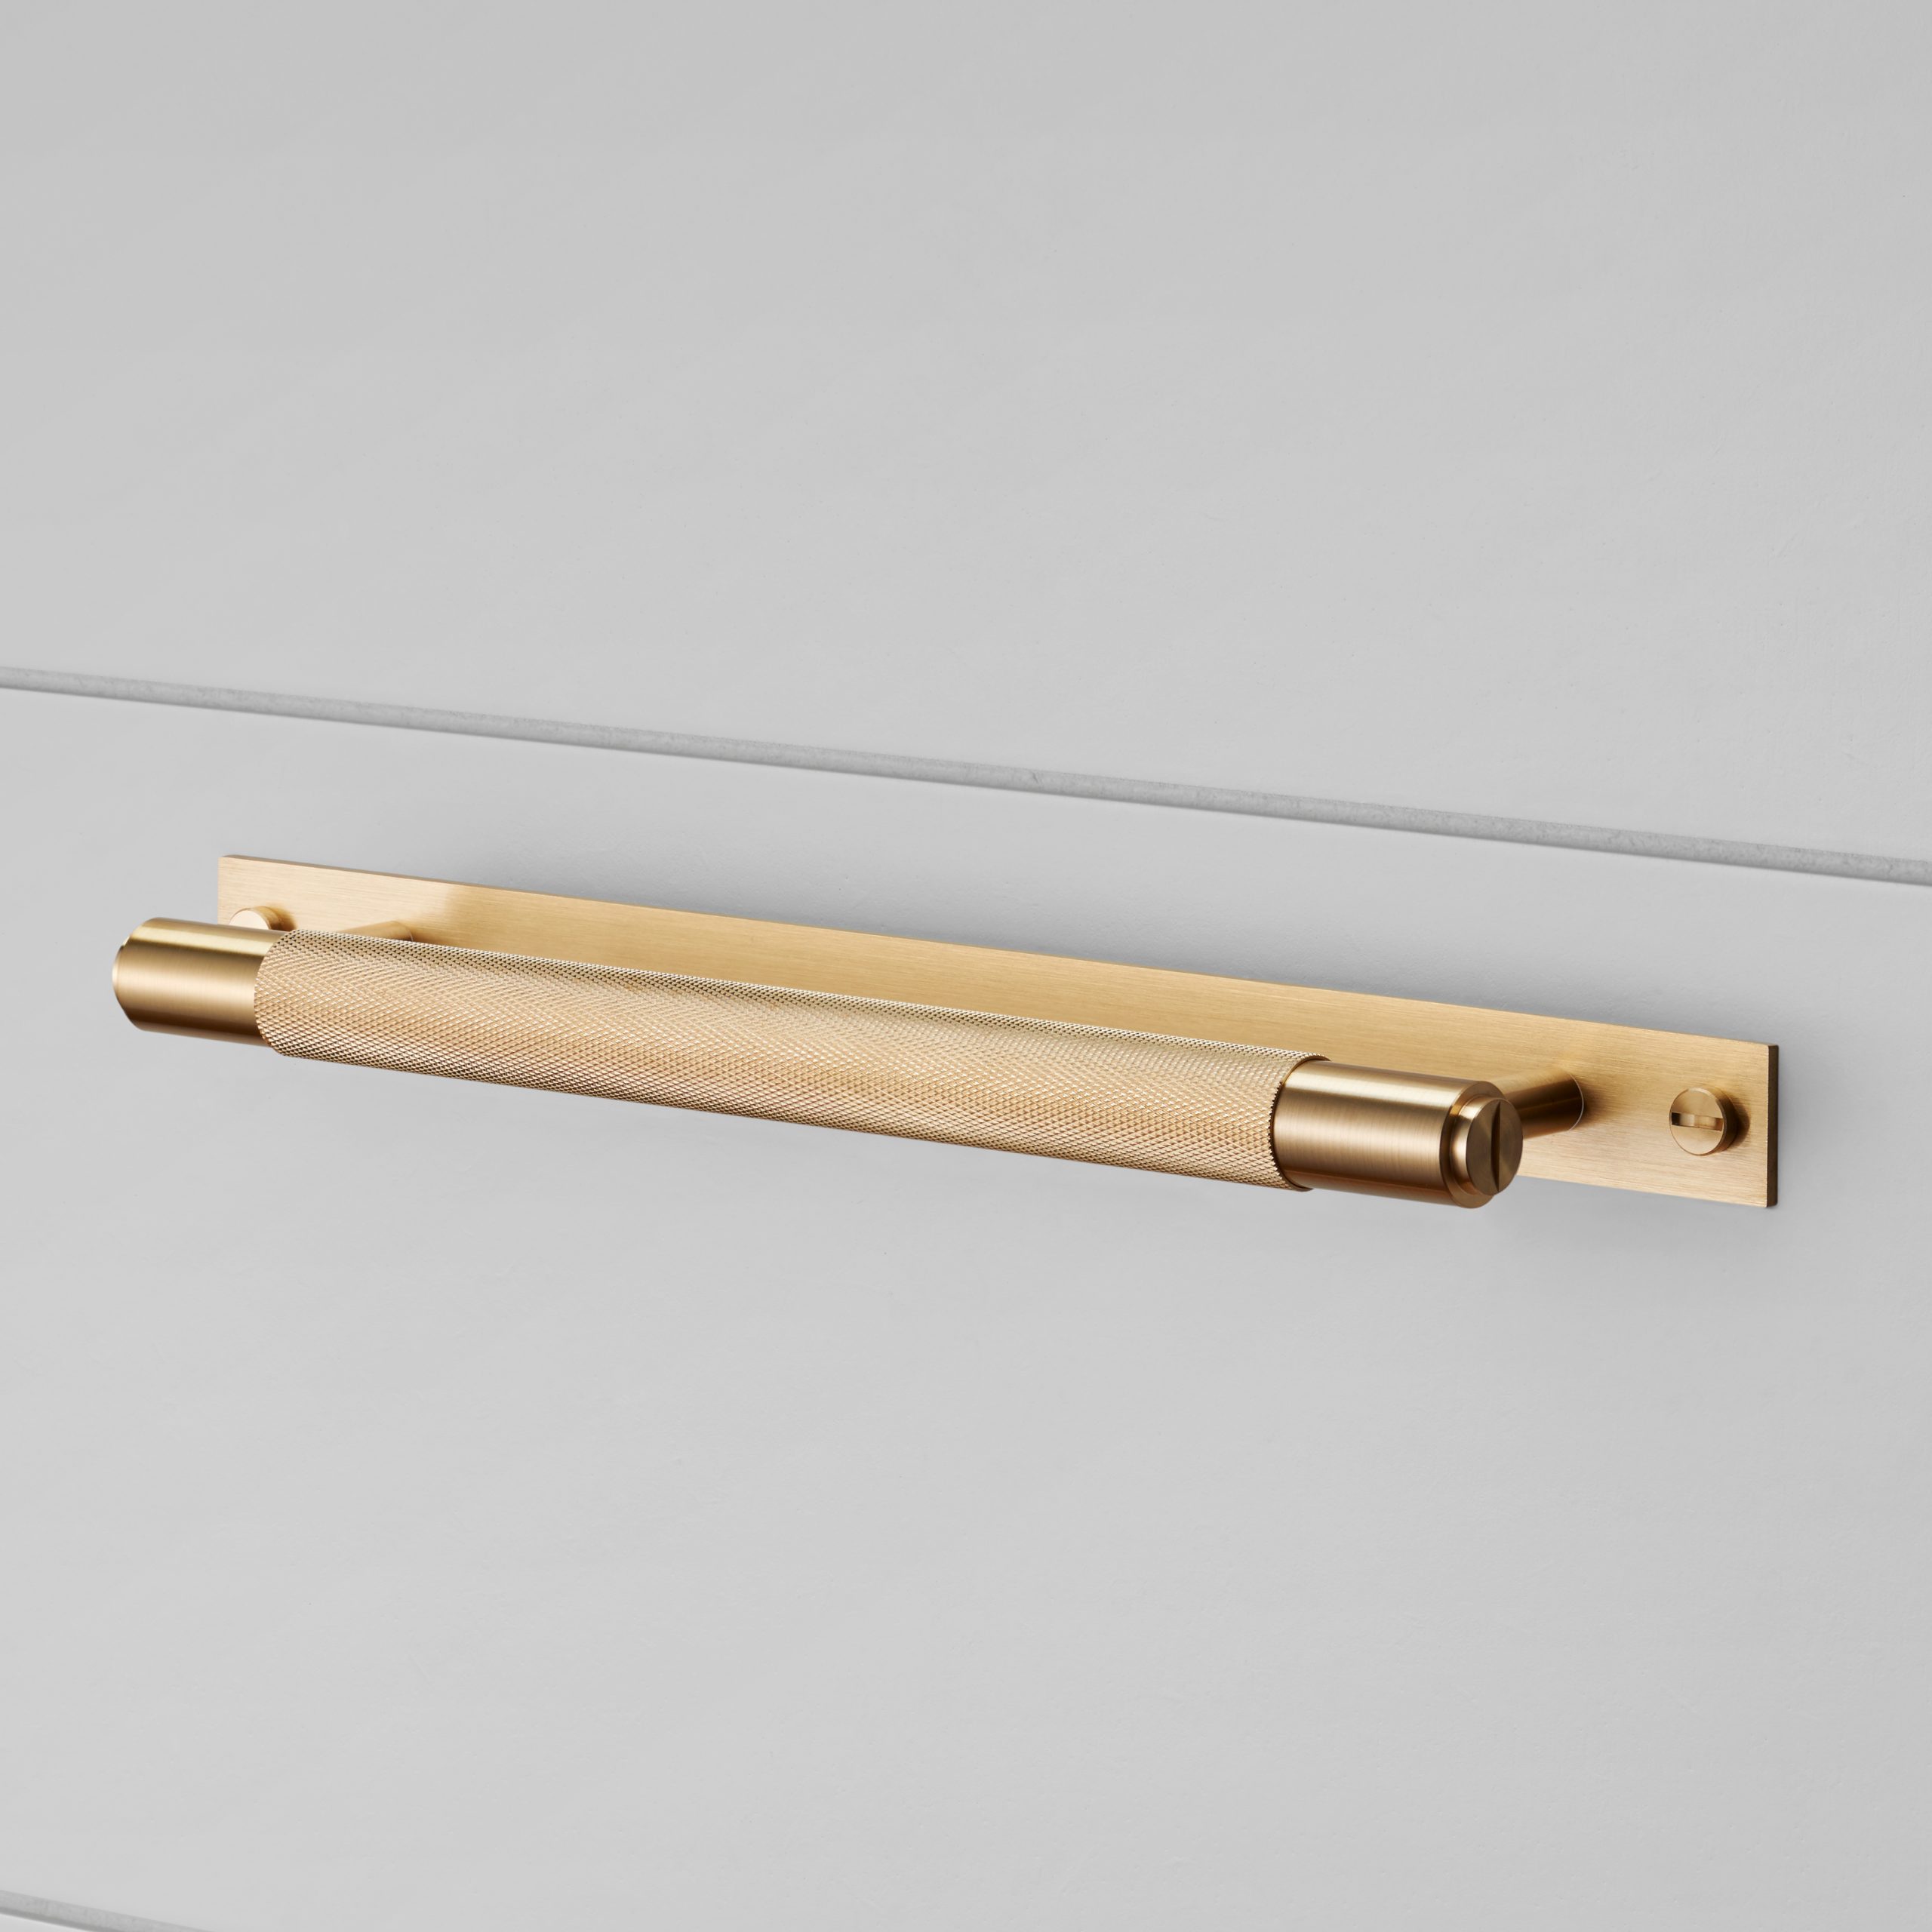 PULL BAR PLATE / BRASS CABINET PULL HANDLE WITH PLATE FOR KITCHEN